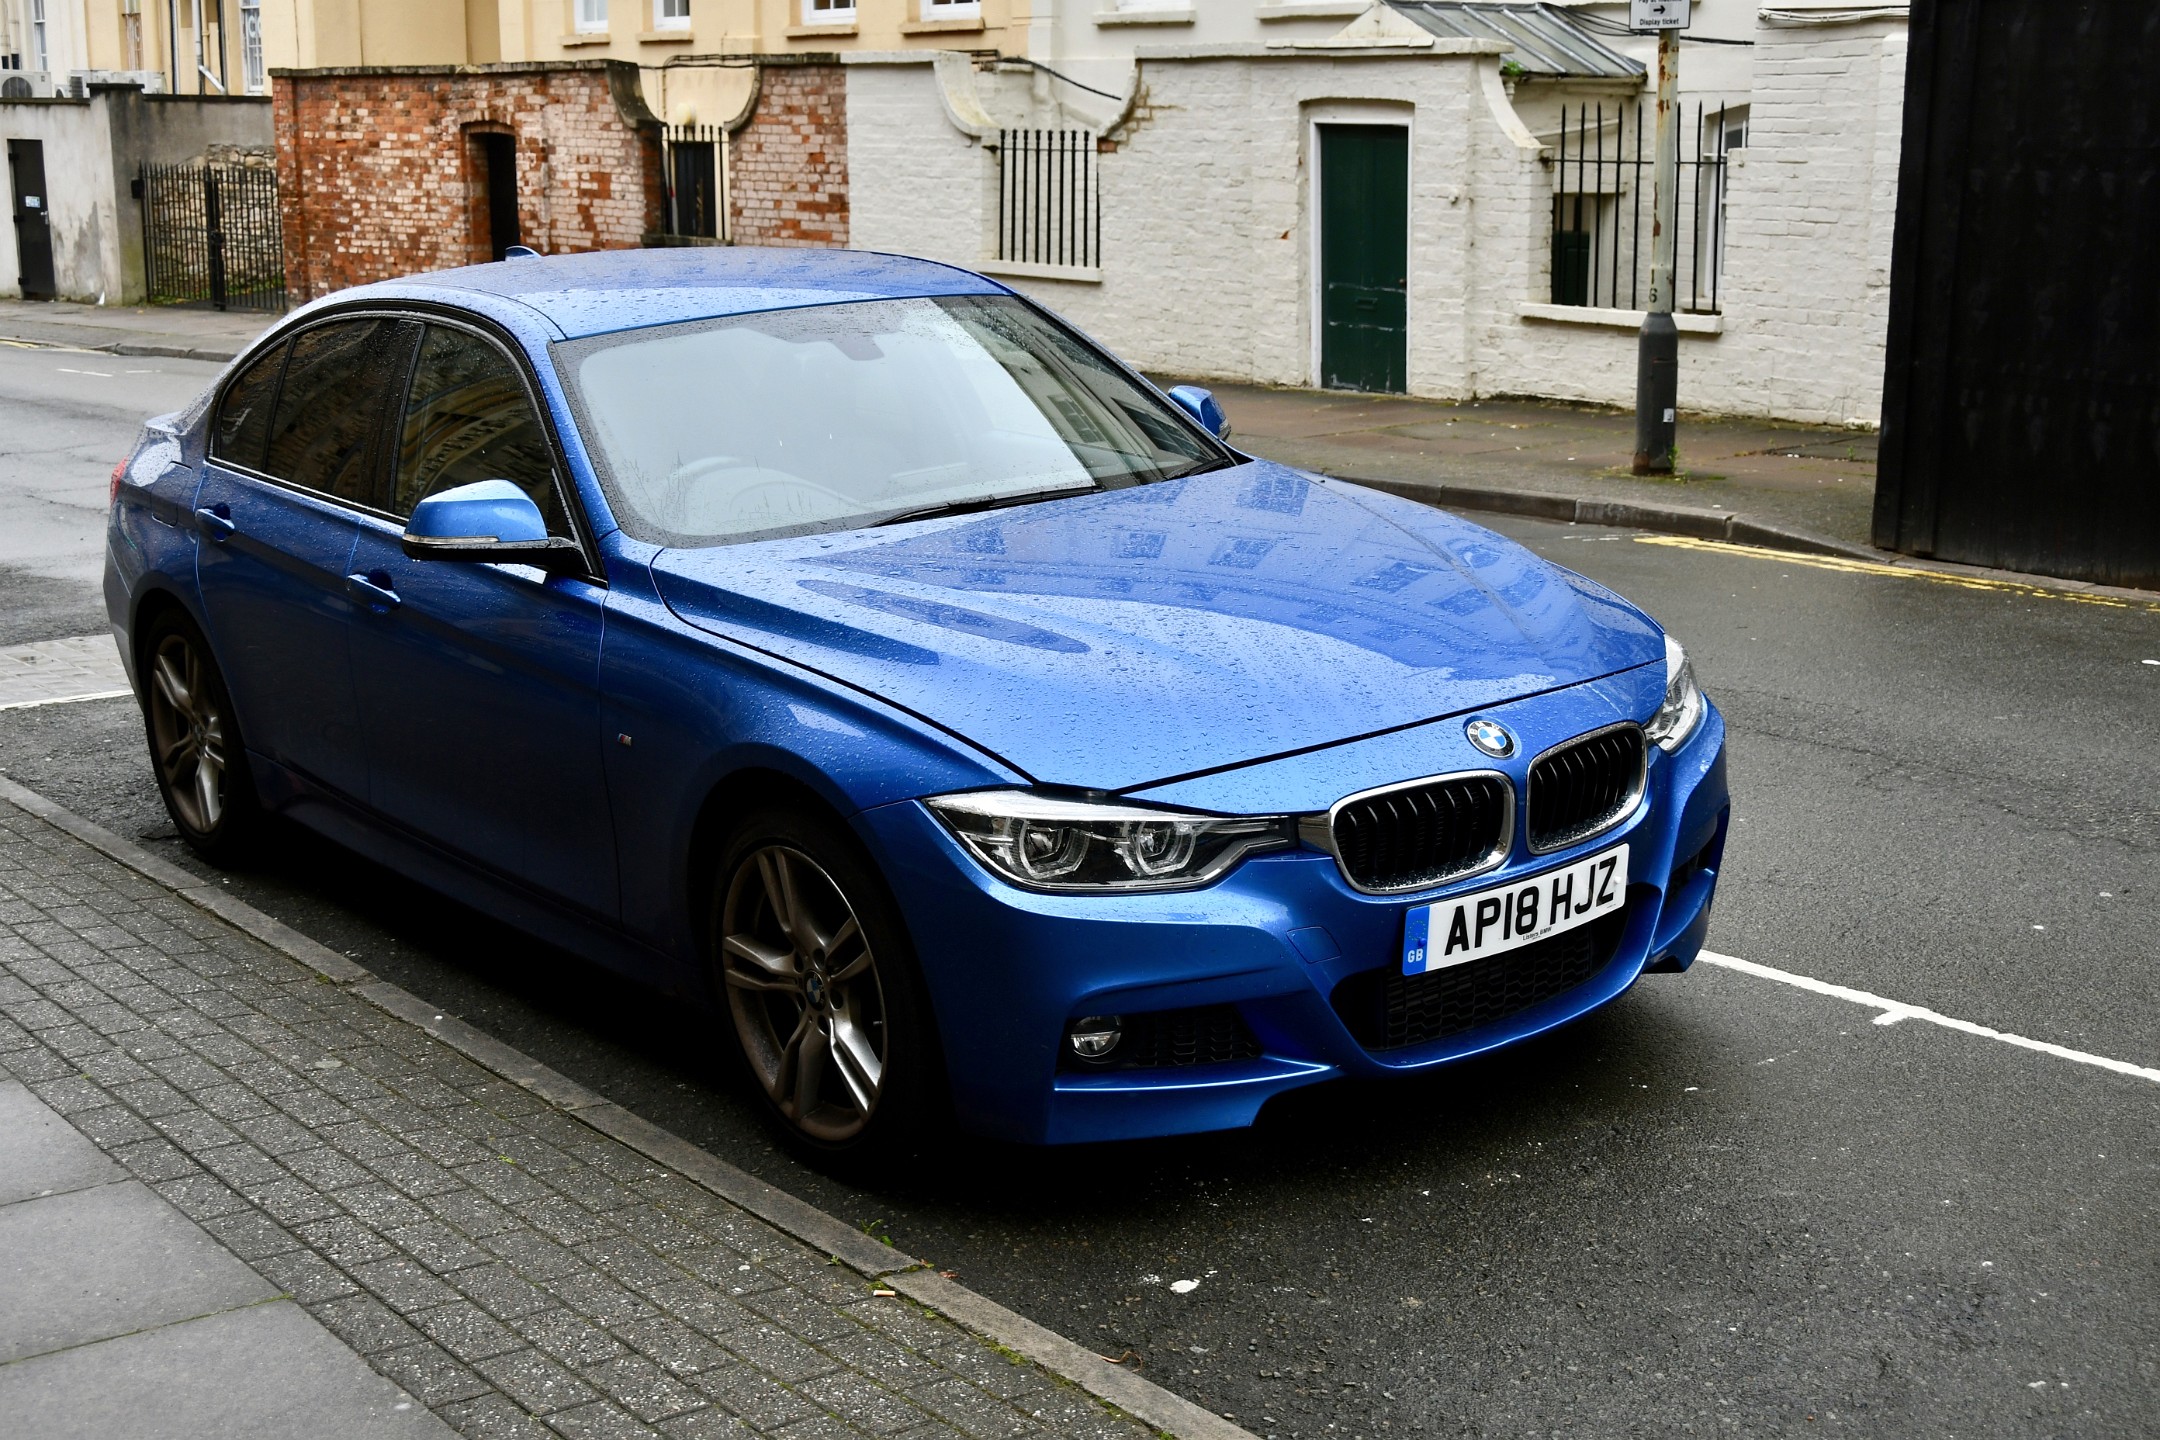 BMW 320d in the Wet 